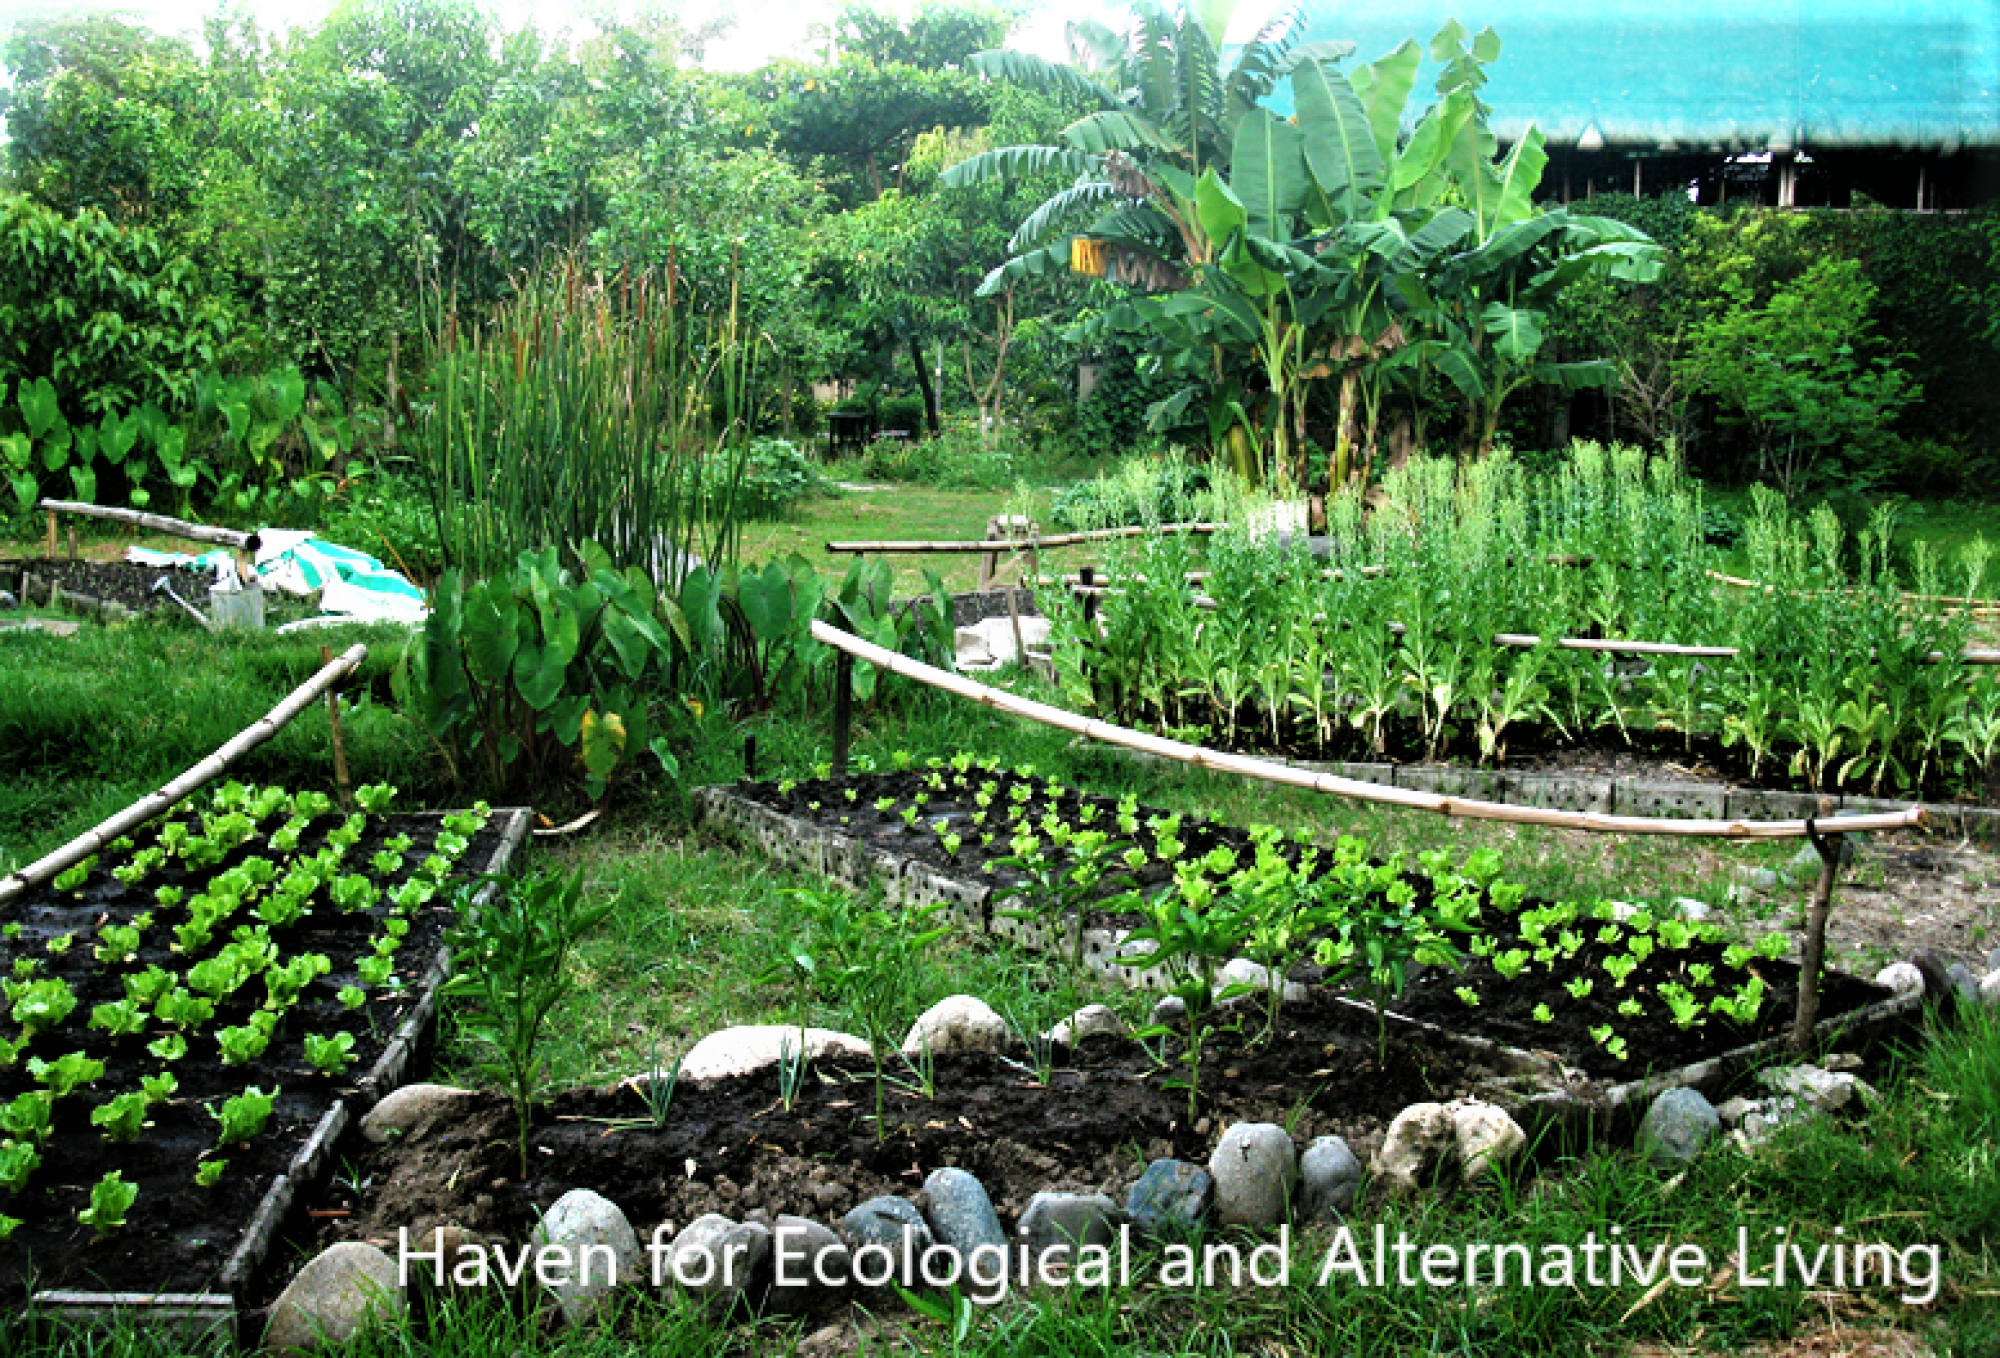 Haven for Ecological and Alternative Living (HEAL) - its garden